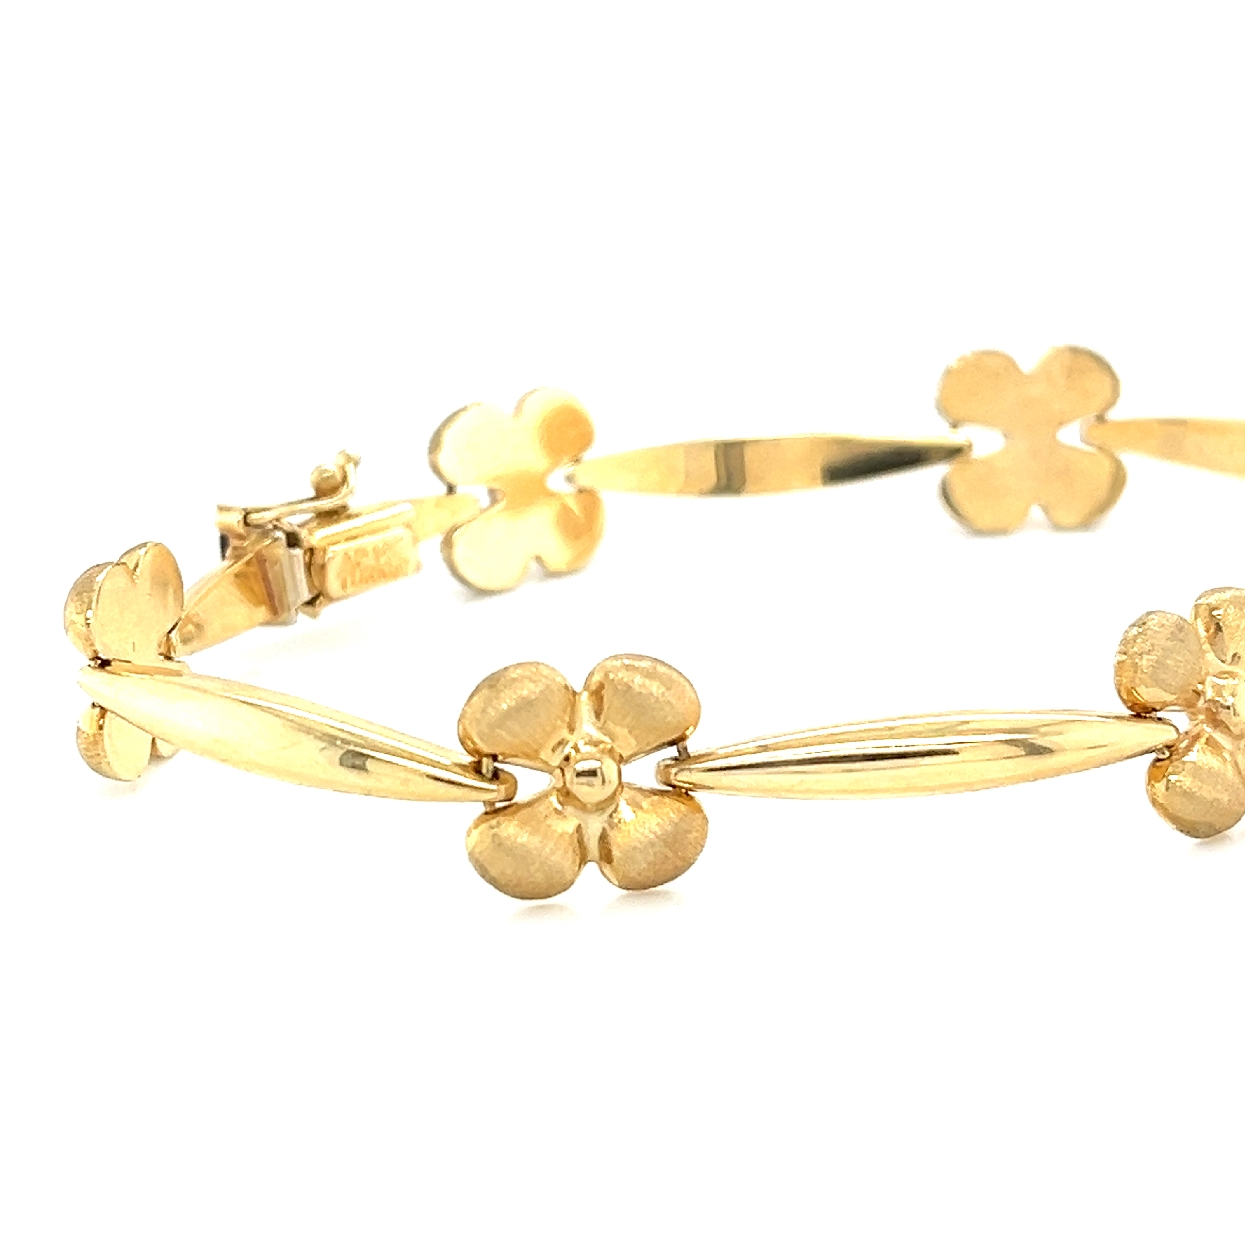 14kt yellow gold clover link bracelet at 7.5 inches